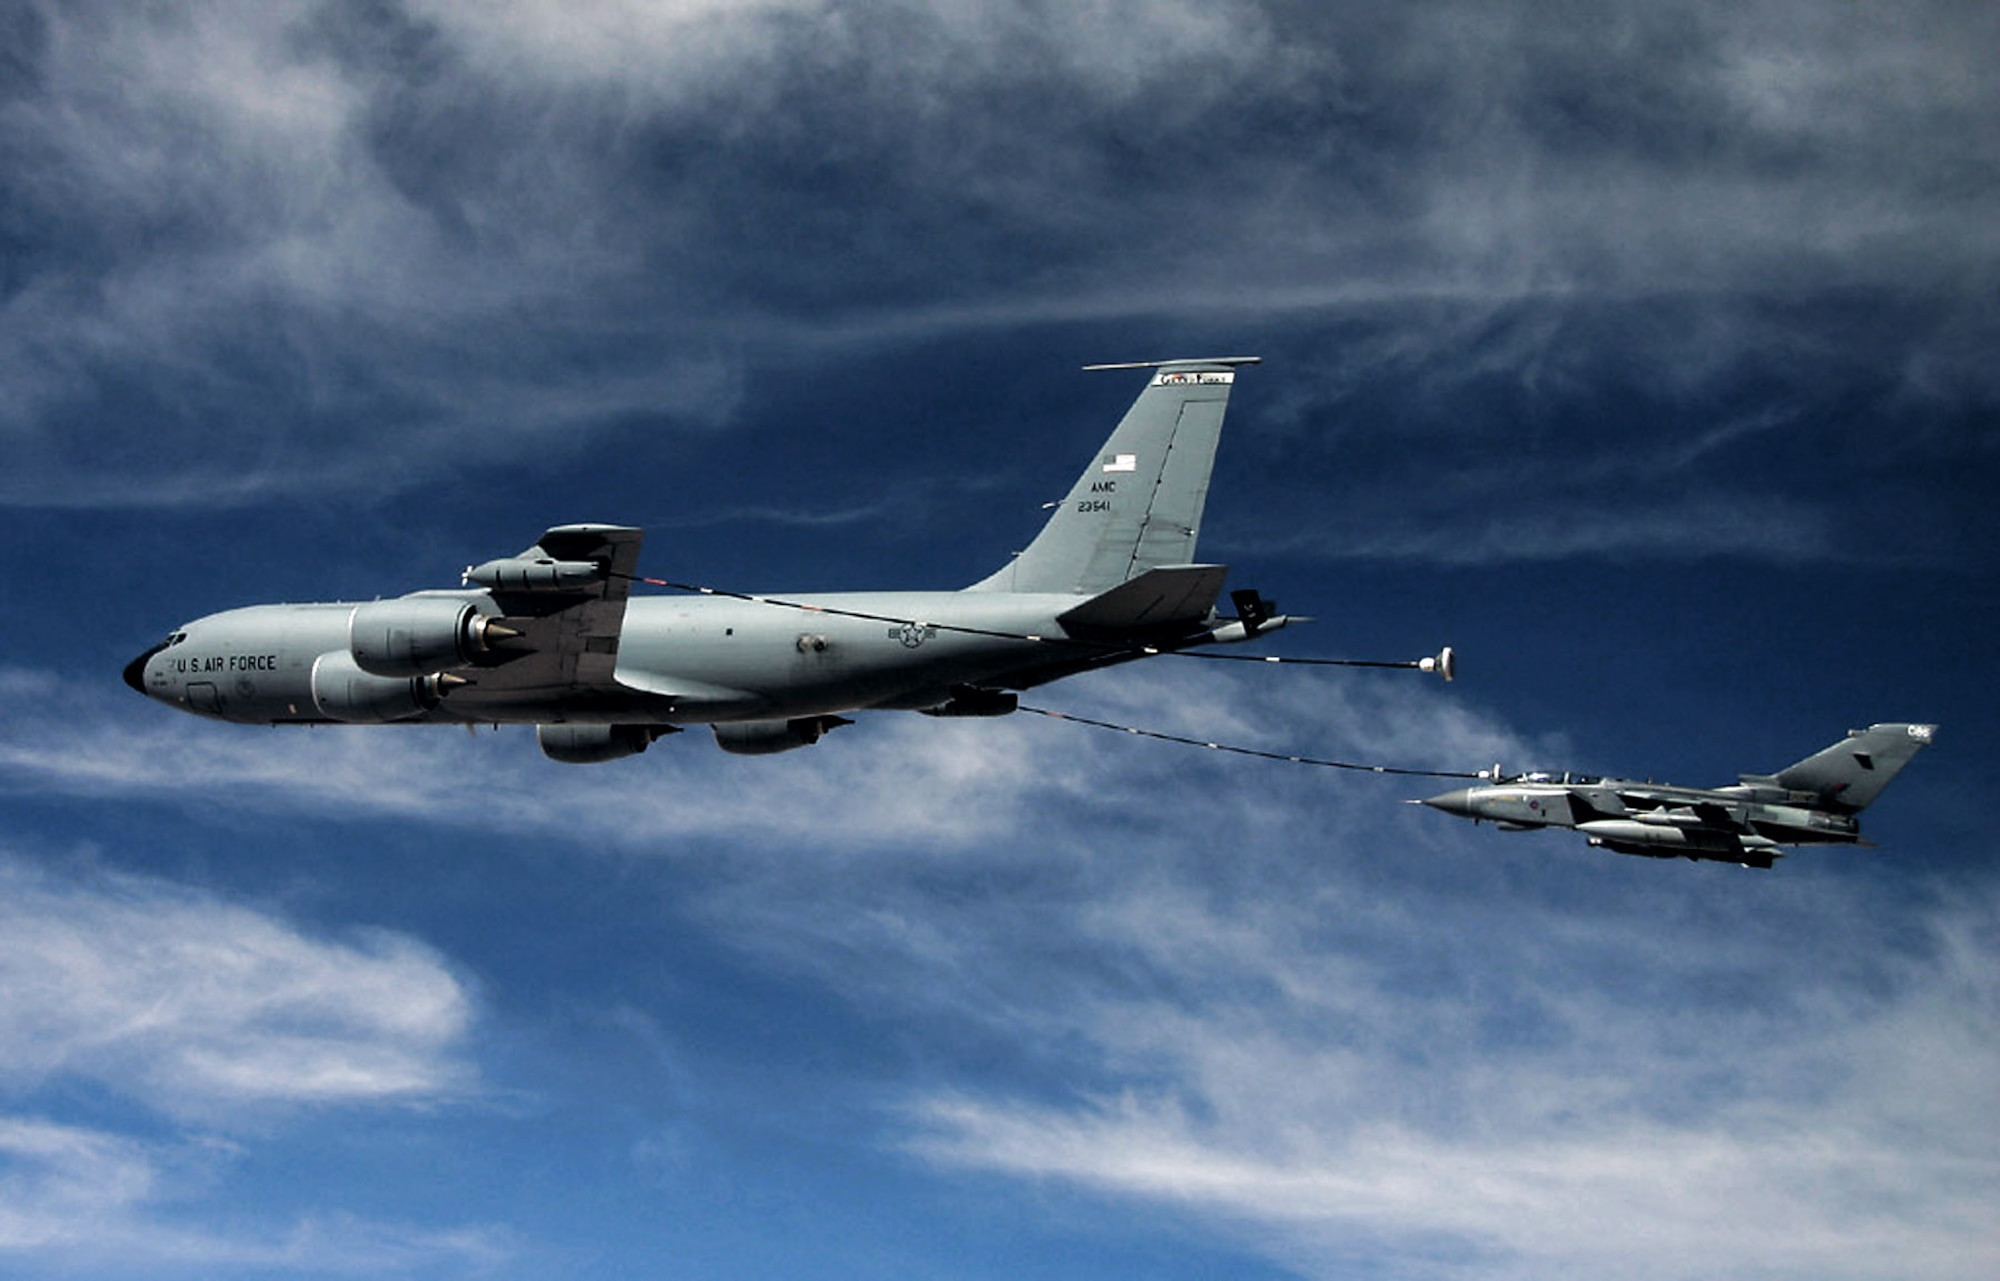 A KC-135 Stratotanker refuels a Royal Air Force GR-4 Tornado over Iraq using the multi-point refueling systems. With MPRS, Air Force tankers have the versatility to refuel Air Force, Navy and coalition aircraft all in the same mission. (U.S. Air Force file photo)